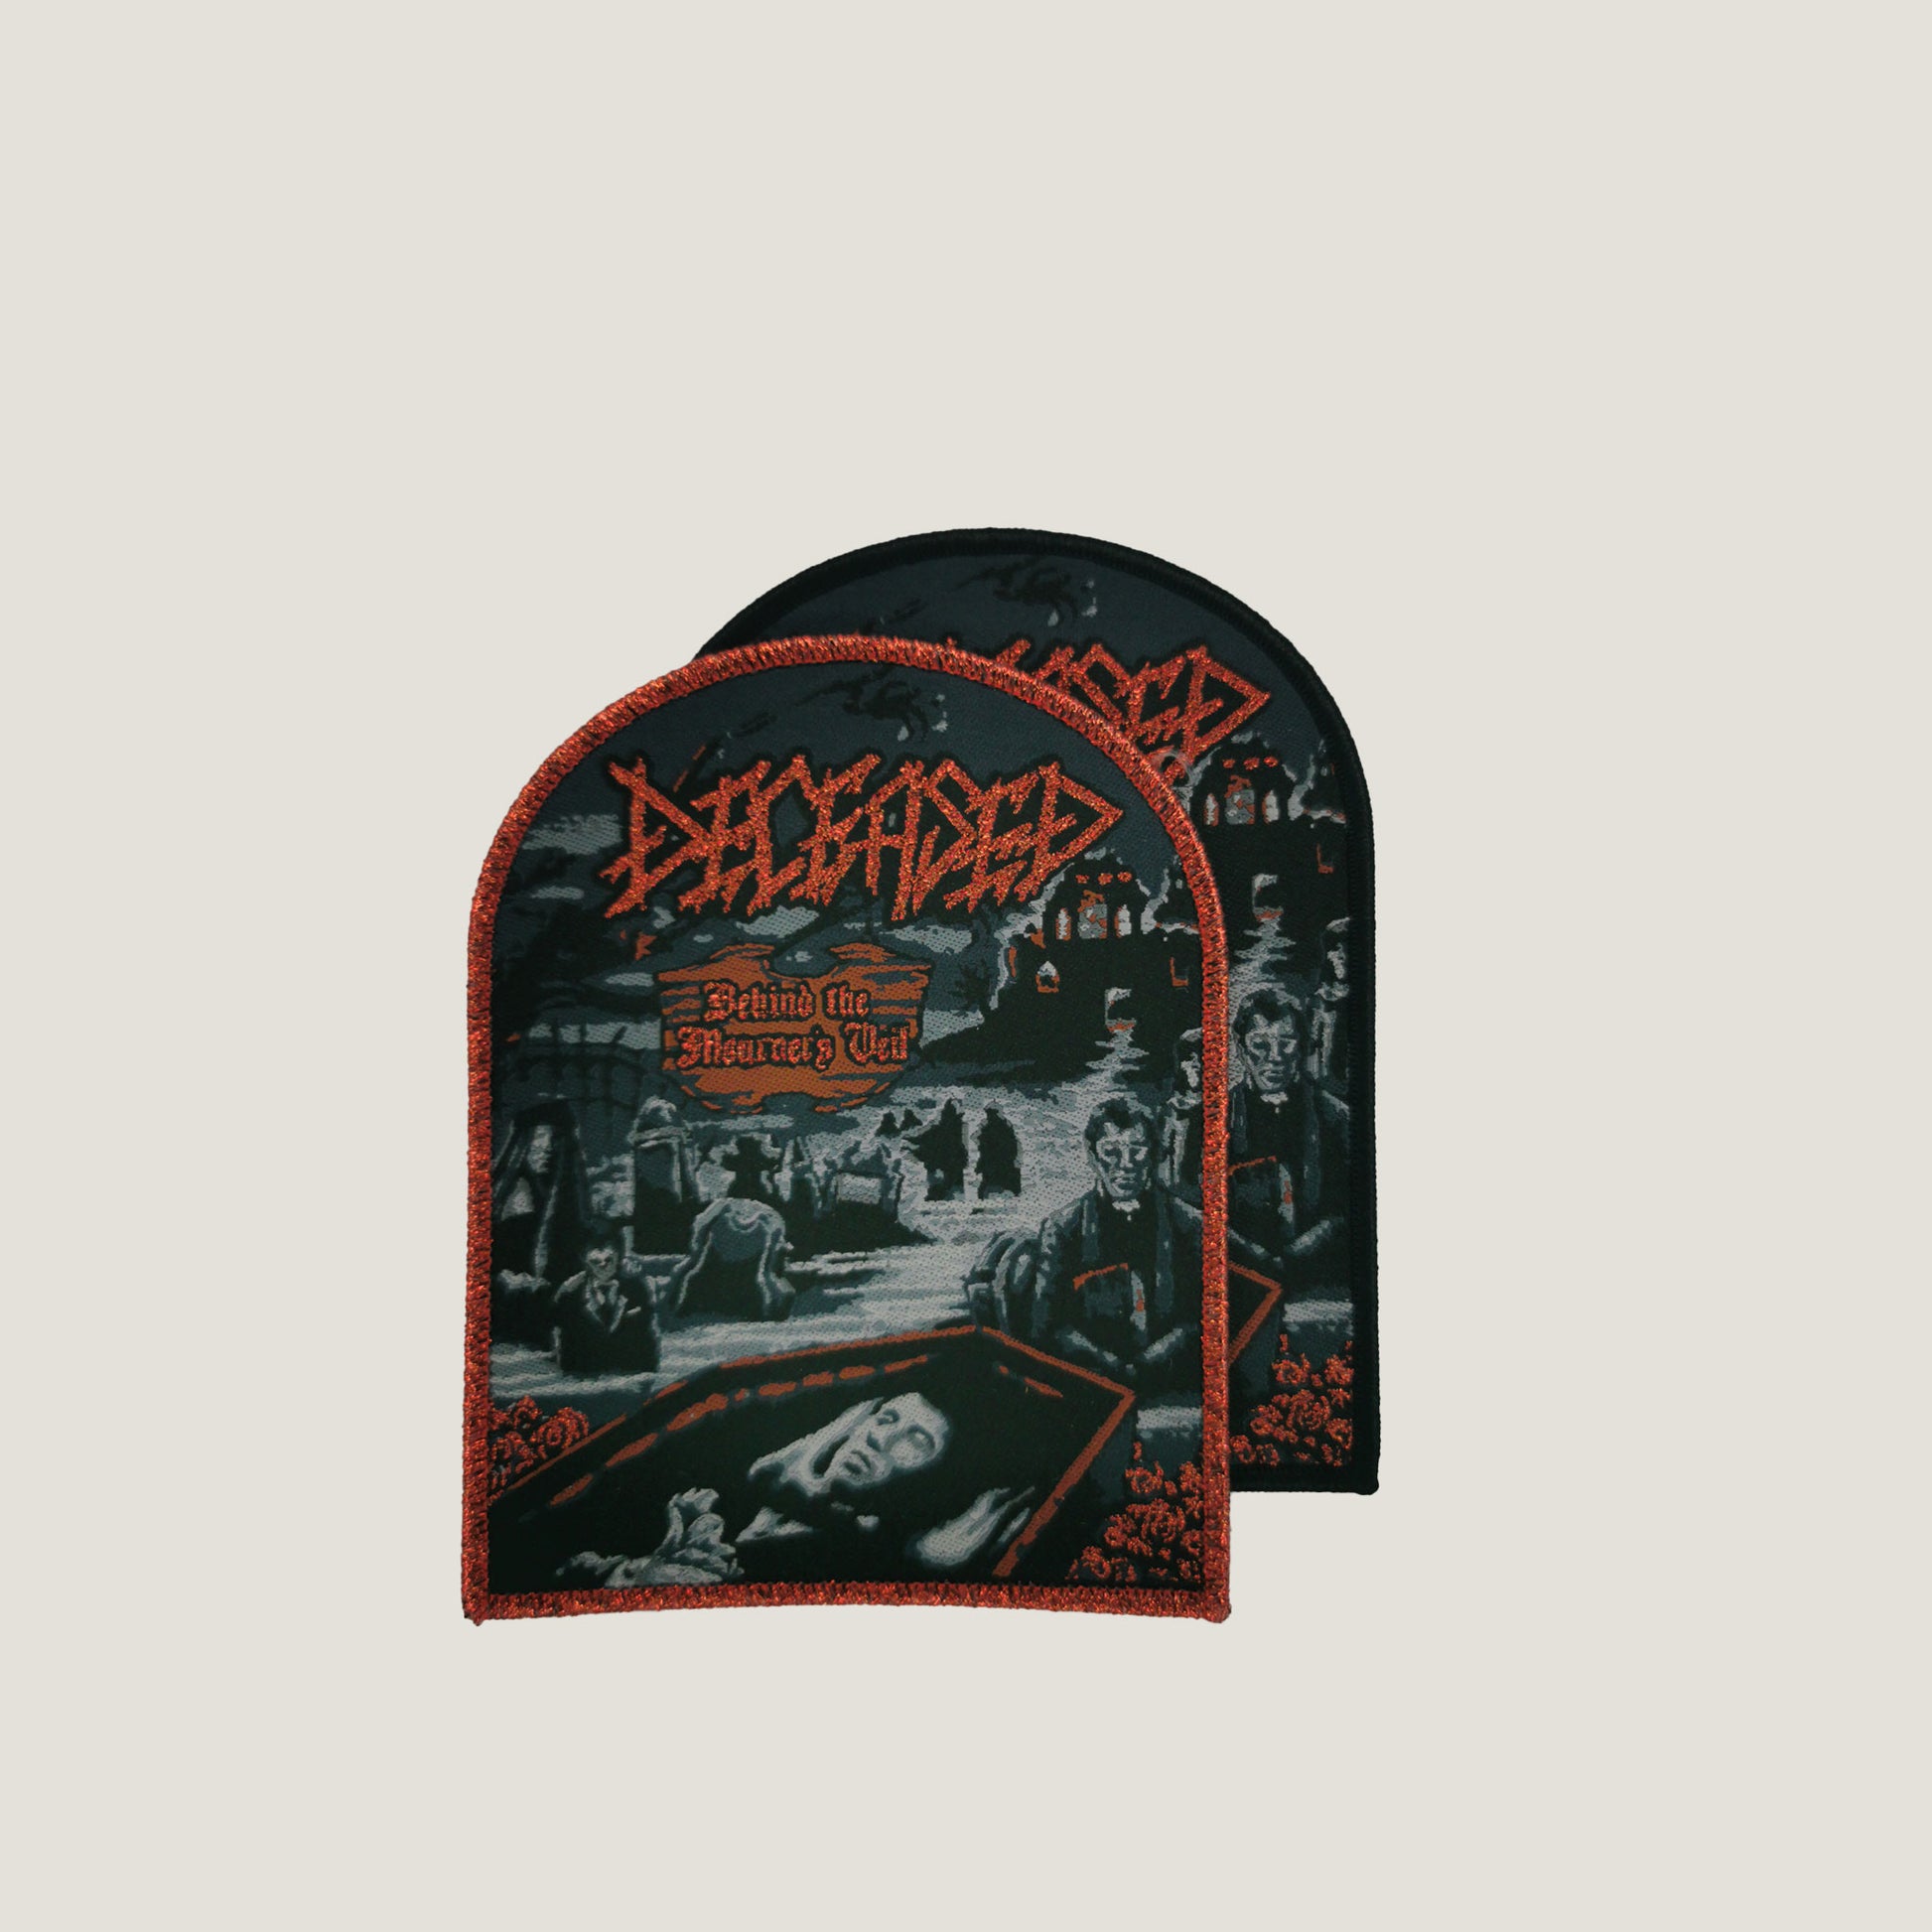 Temporal Dimensions Patches Deceased Behind the Mourners Veil Woven Patches